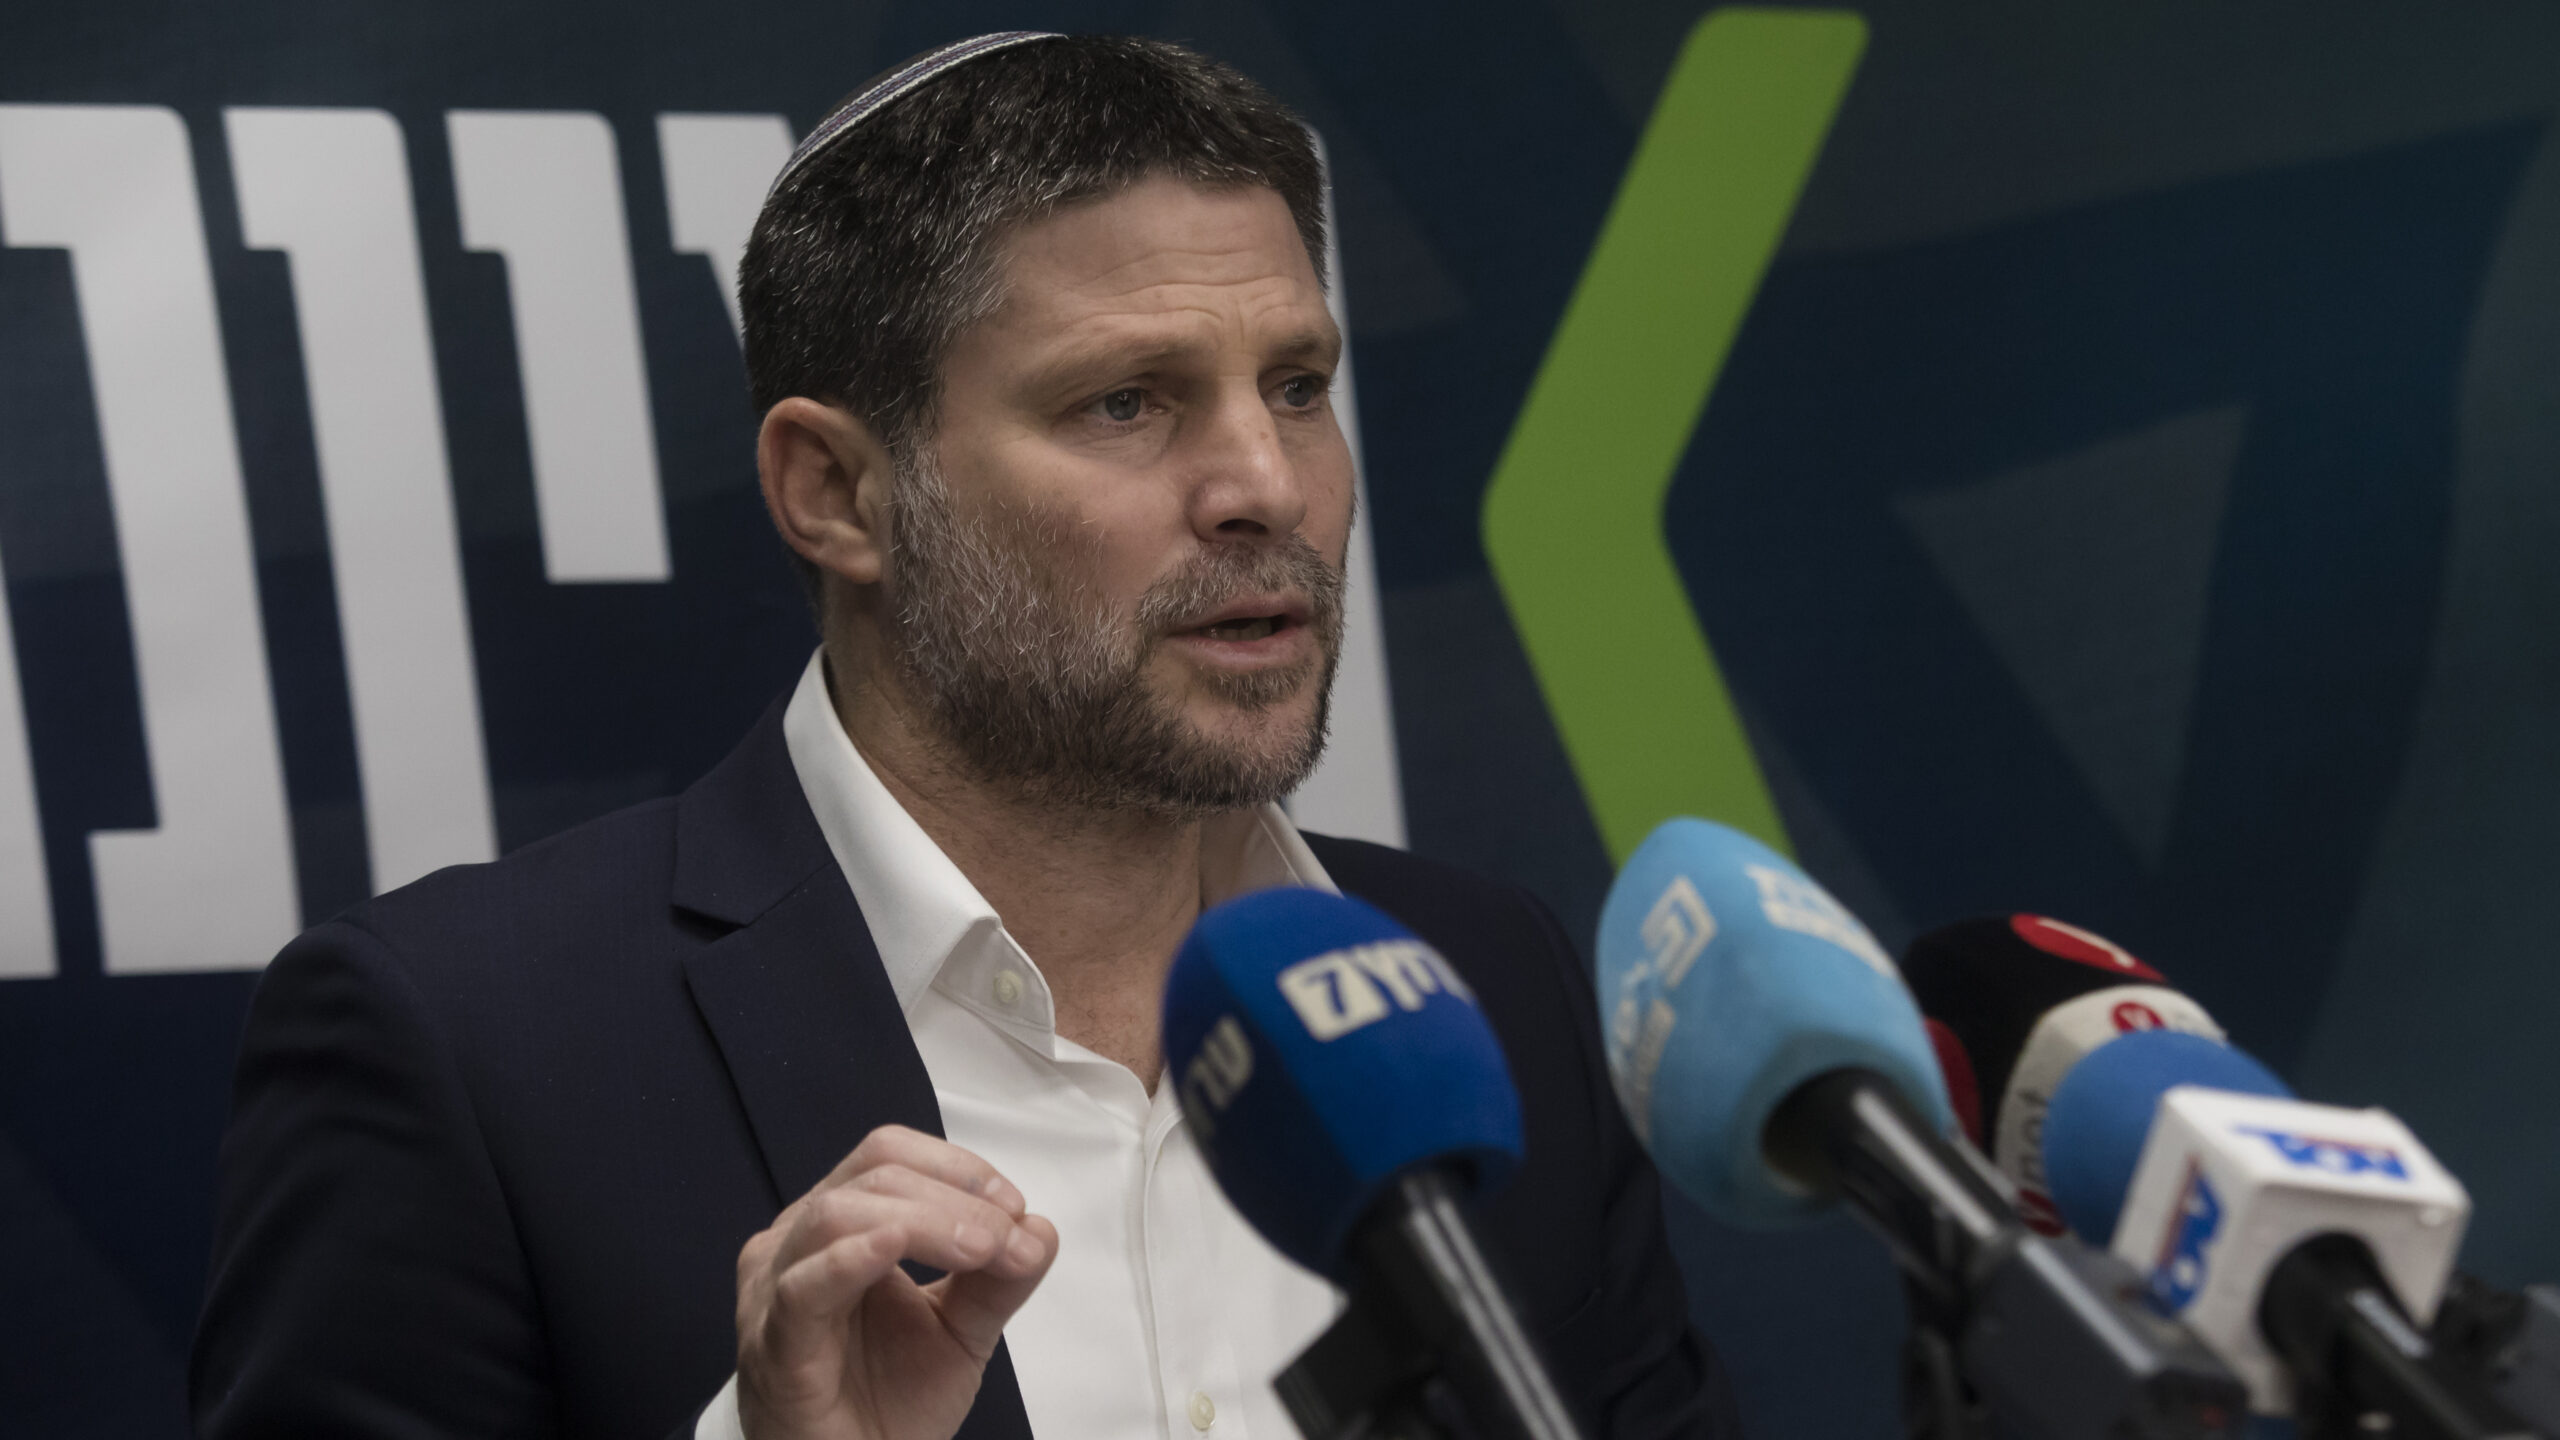 Israeli Finance Minister urges for a strong response against Iran